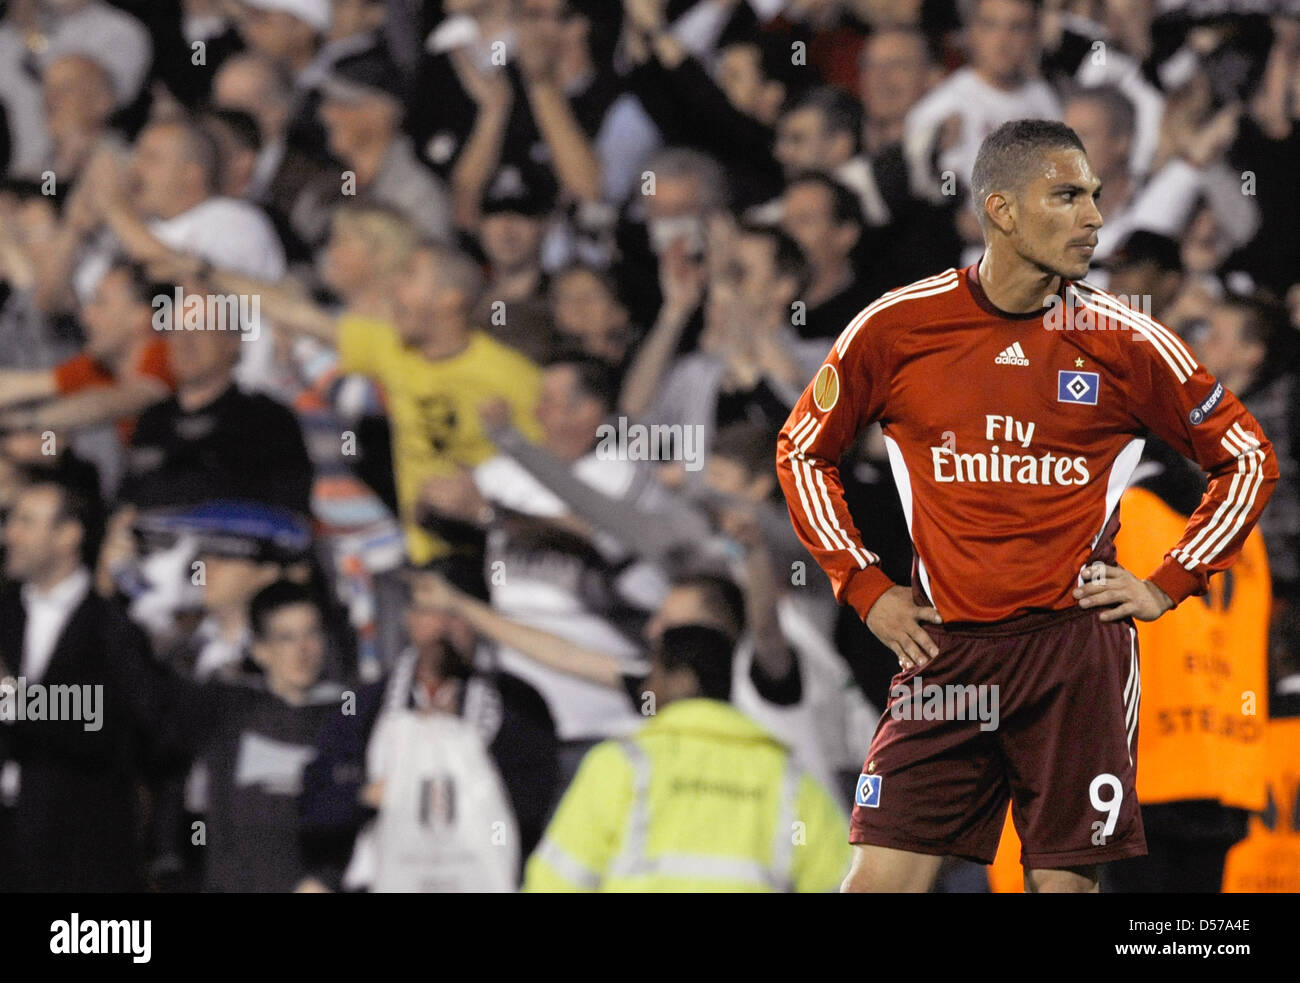 Hamburg's José Paolo Guerrero is disappointed after the UEFA Europa League semi-final second leg match FC Fulham vs SV Hamburg at Craven Cottage stadium in London, Great Britain, 29 April 2010. Fulham won the match 2-1 and moves on to the final. Photo: Fabian Bimmer Stock Photo